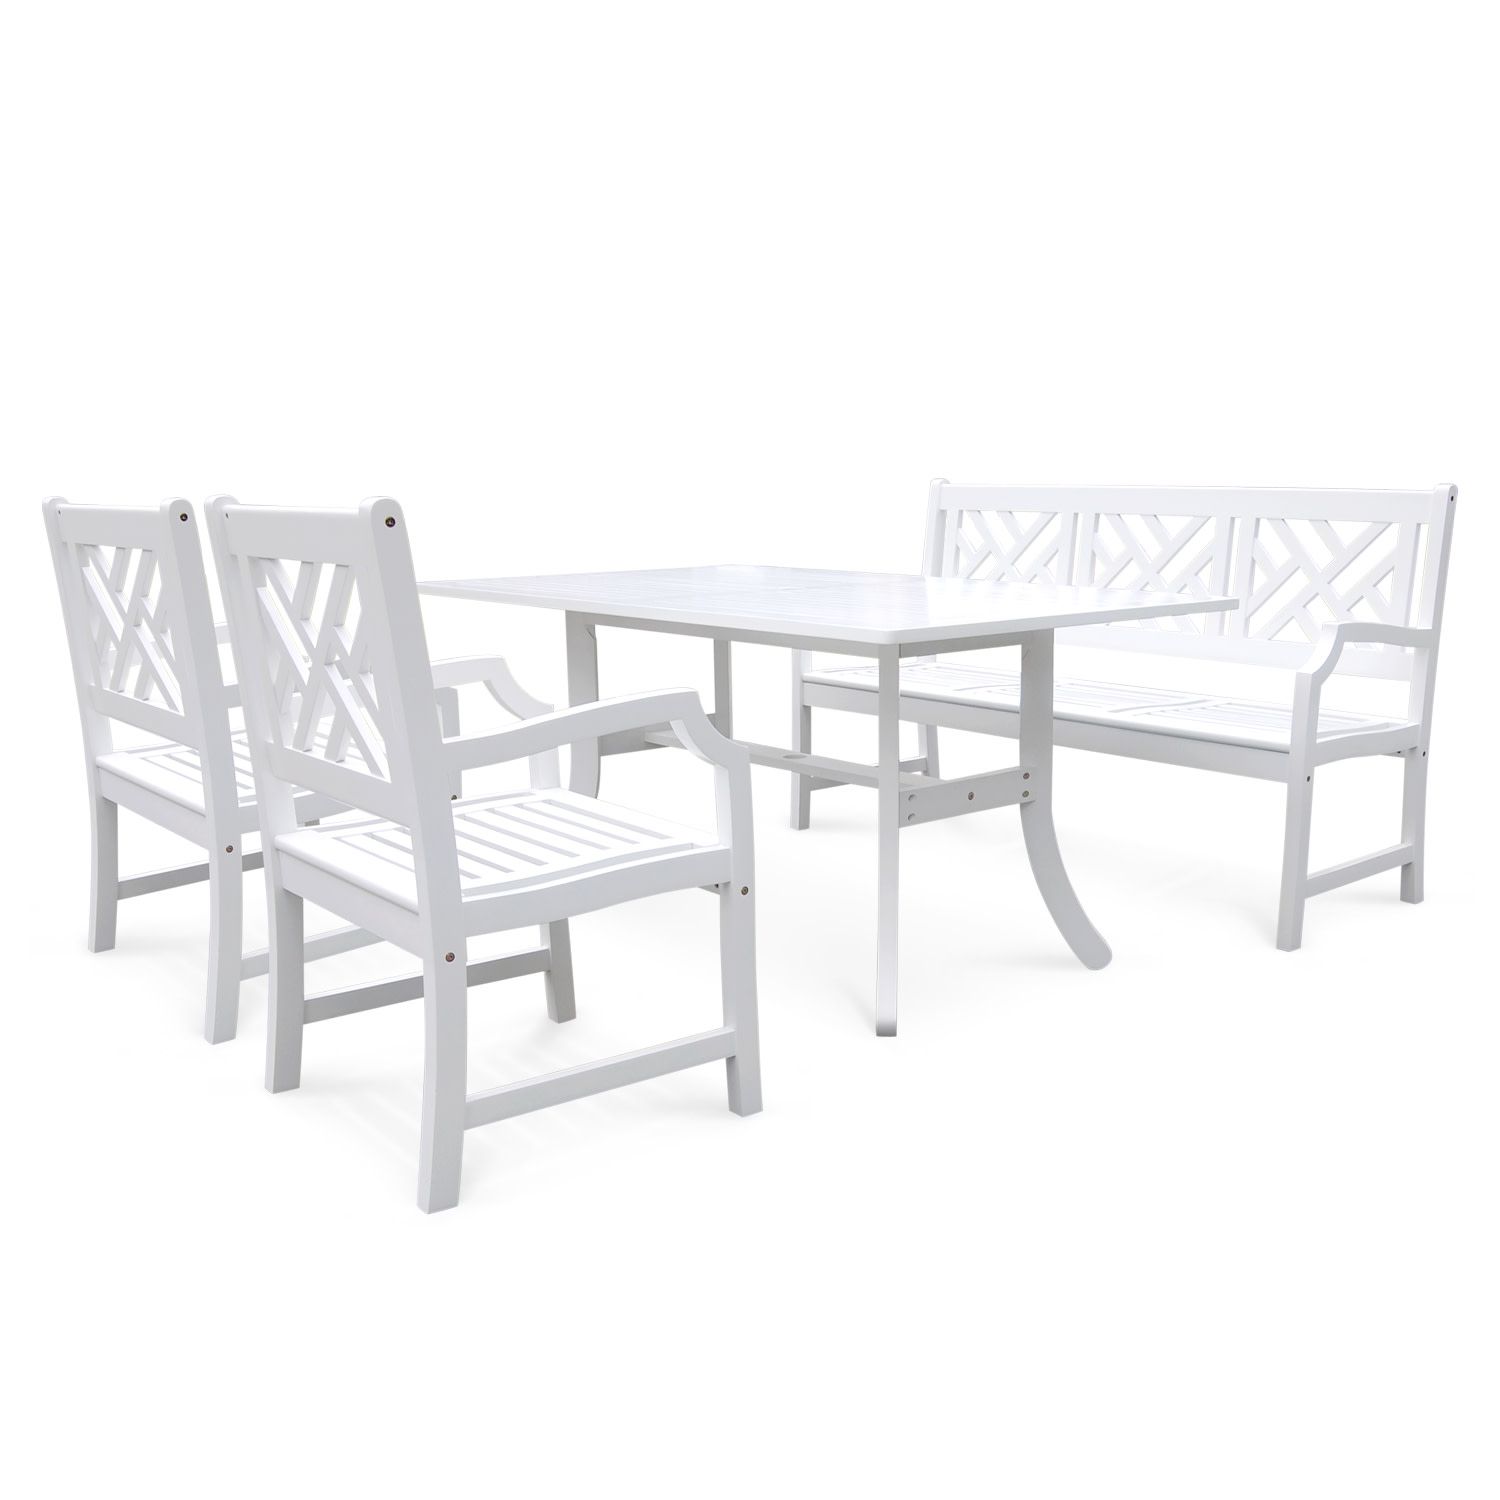 Bradley Outdoor 4 Piece Wood Patio Dining Set With 5 Foot Bench In Throughout White 4 Piece Outdoor Seating Patio Sets (View 6 of 15)